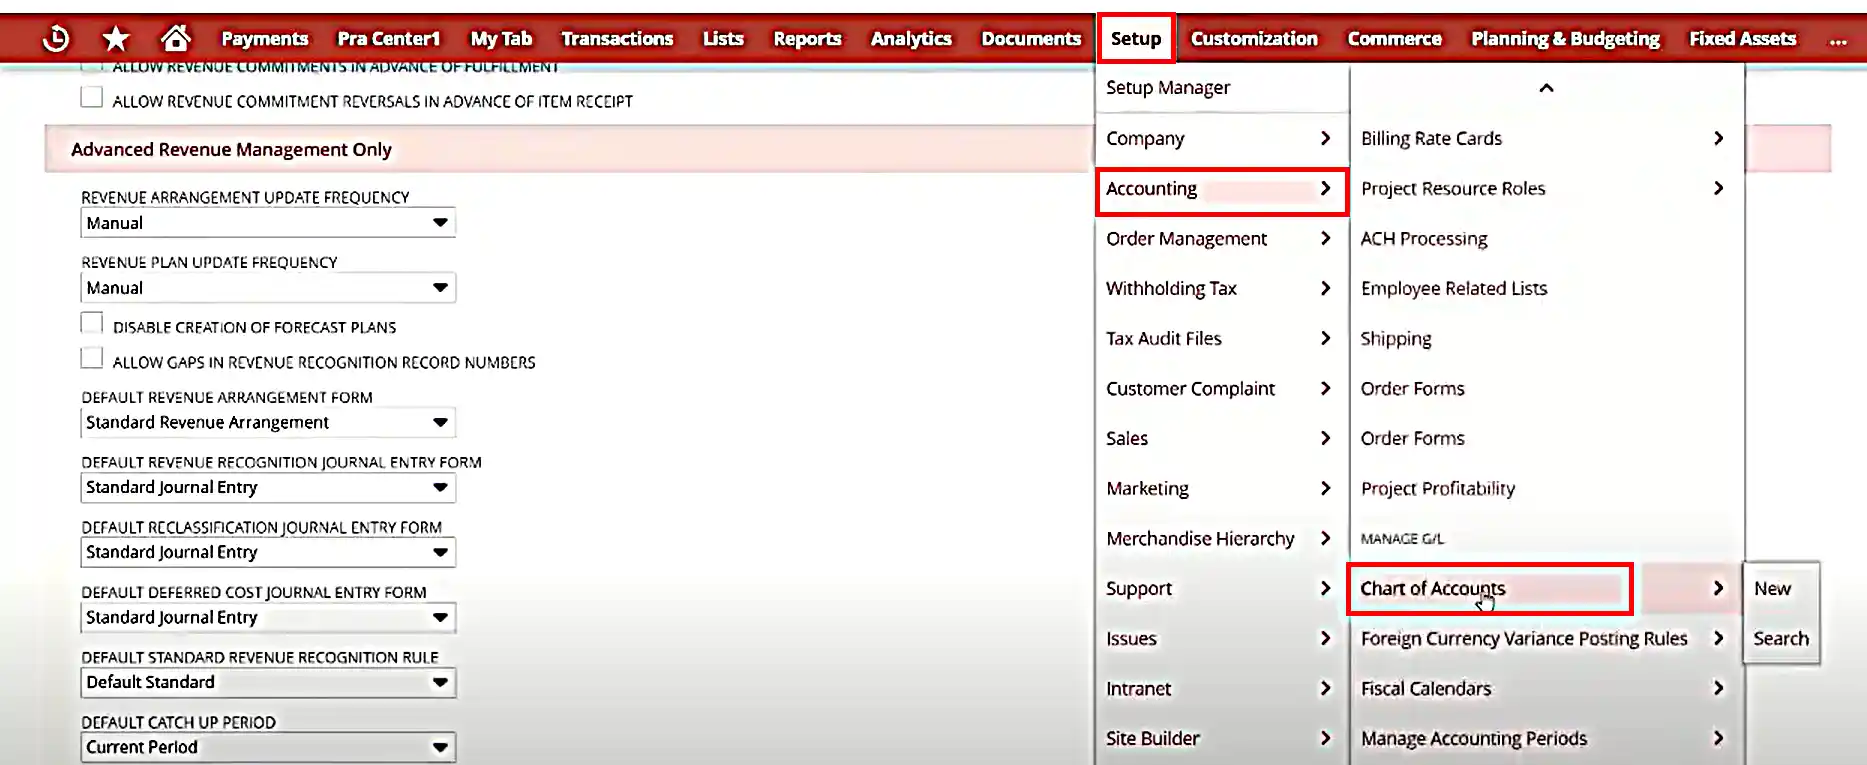 Go to “Setup” tab on NetSuite’s dashboard. Click on “Accounting” and then select Chart of Accounts from the drop-down menu.